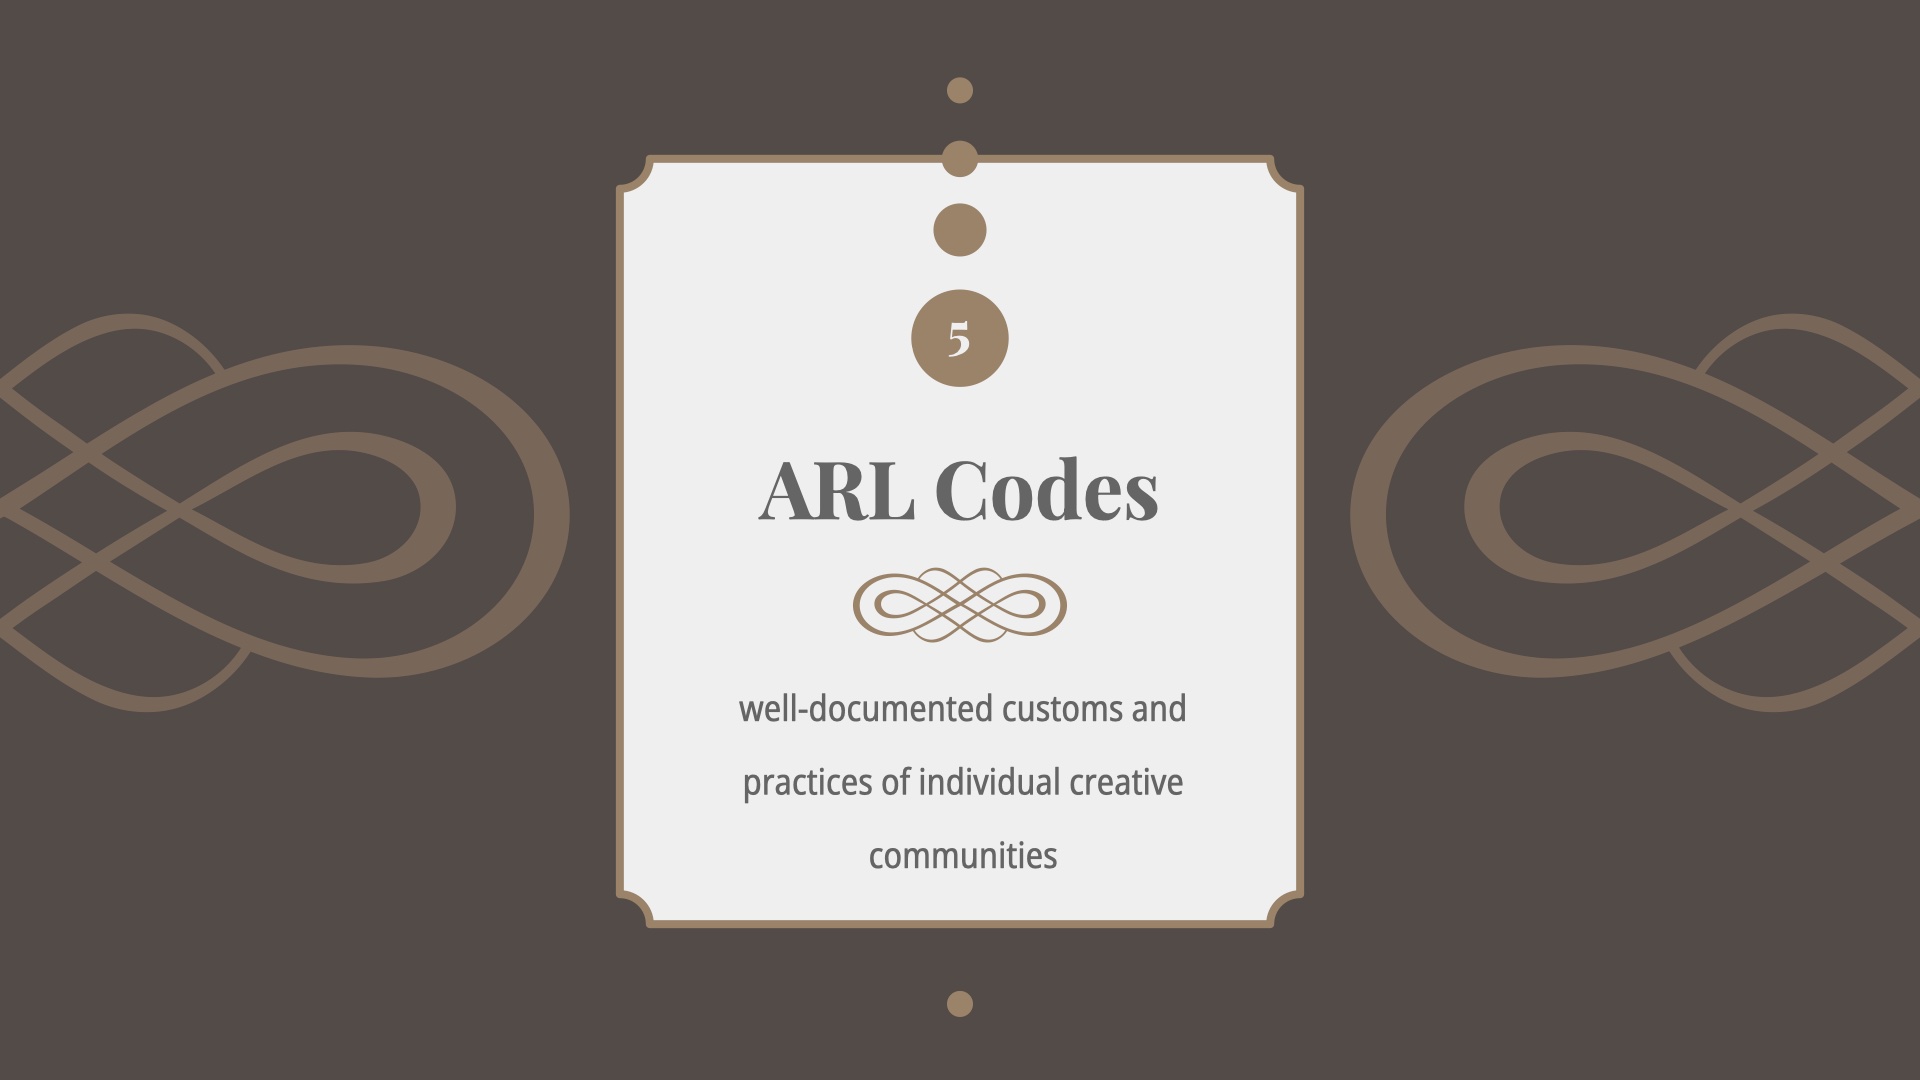 Title Card 5: ARL Codes. Well-documented customs and practices of individual creative communities.